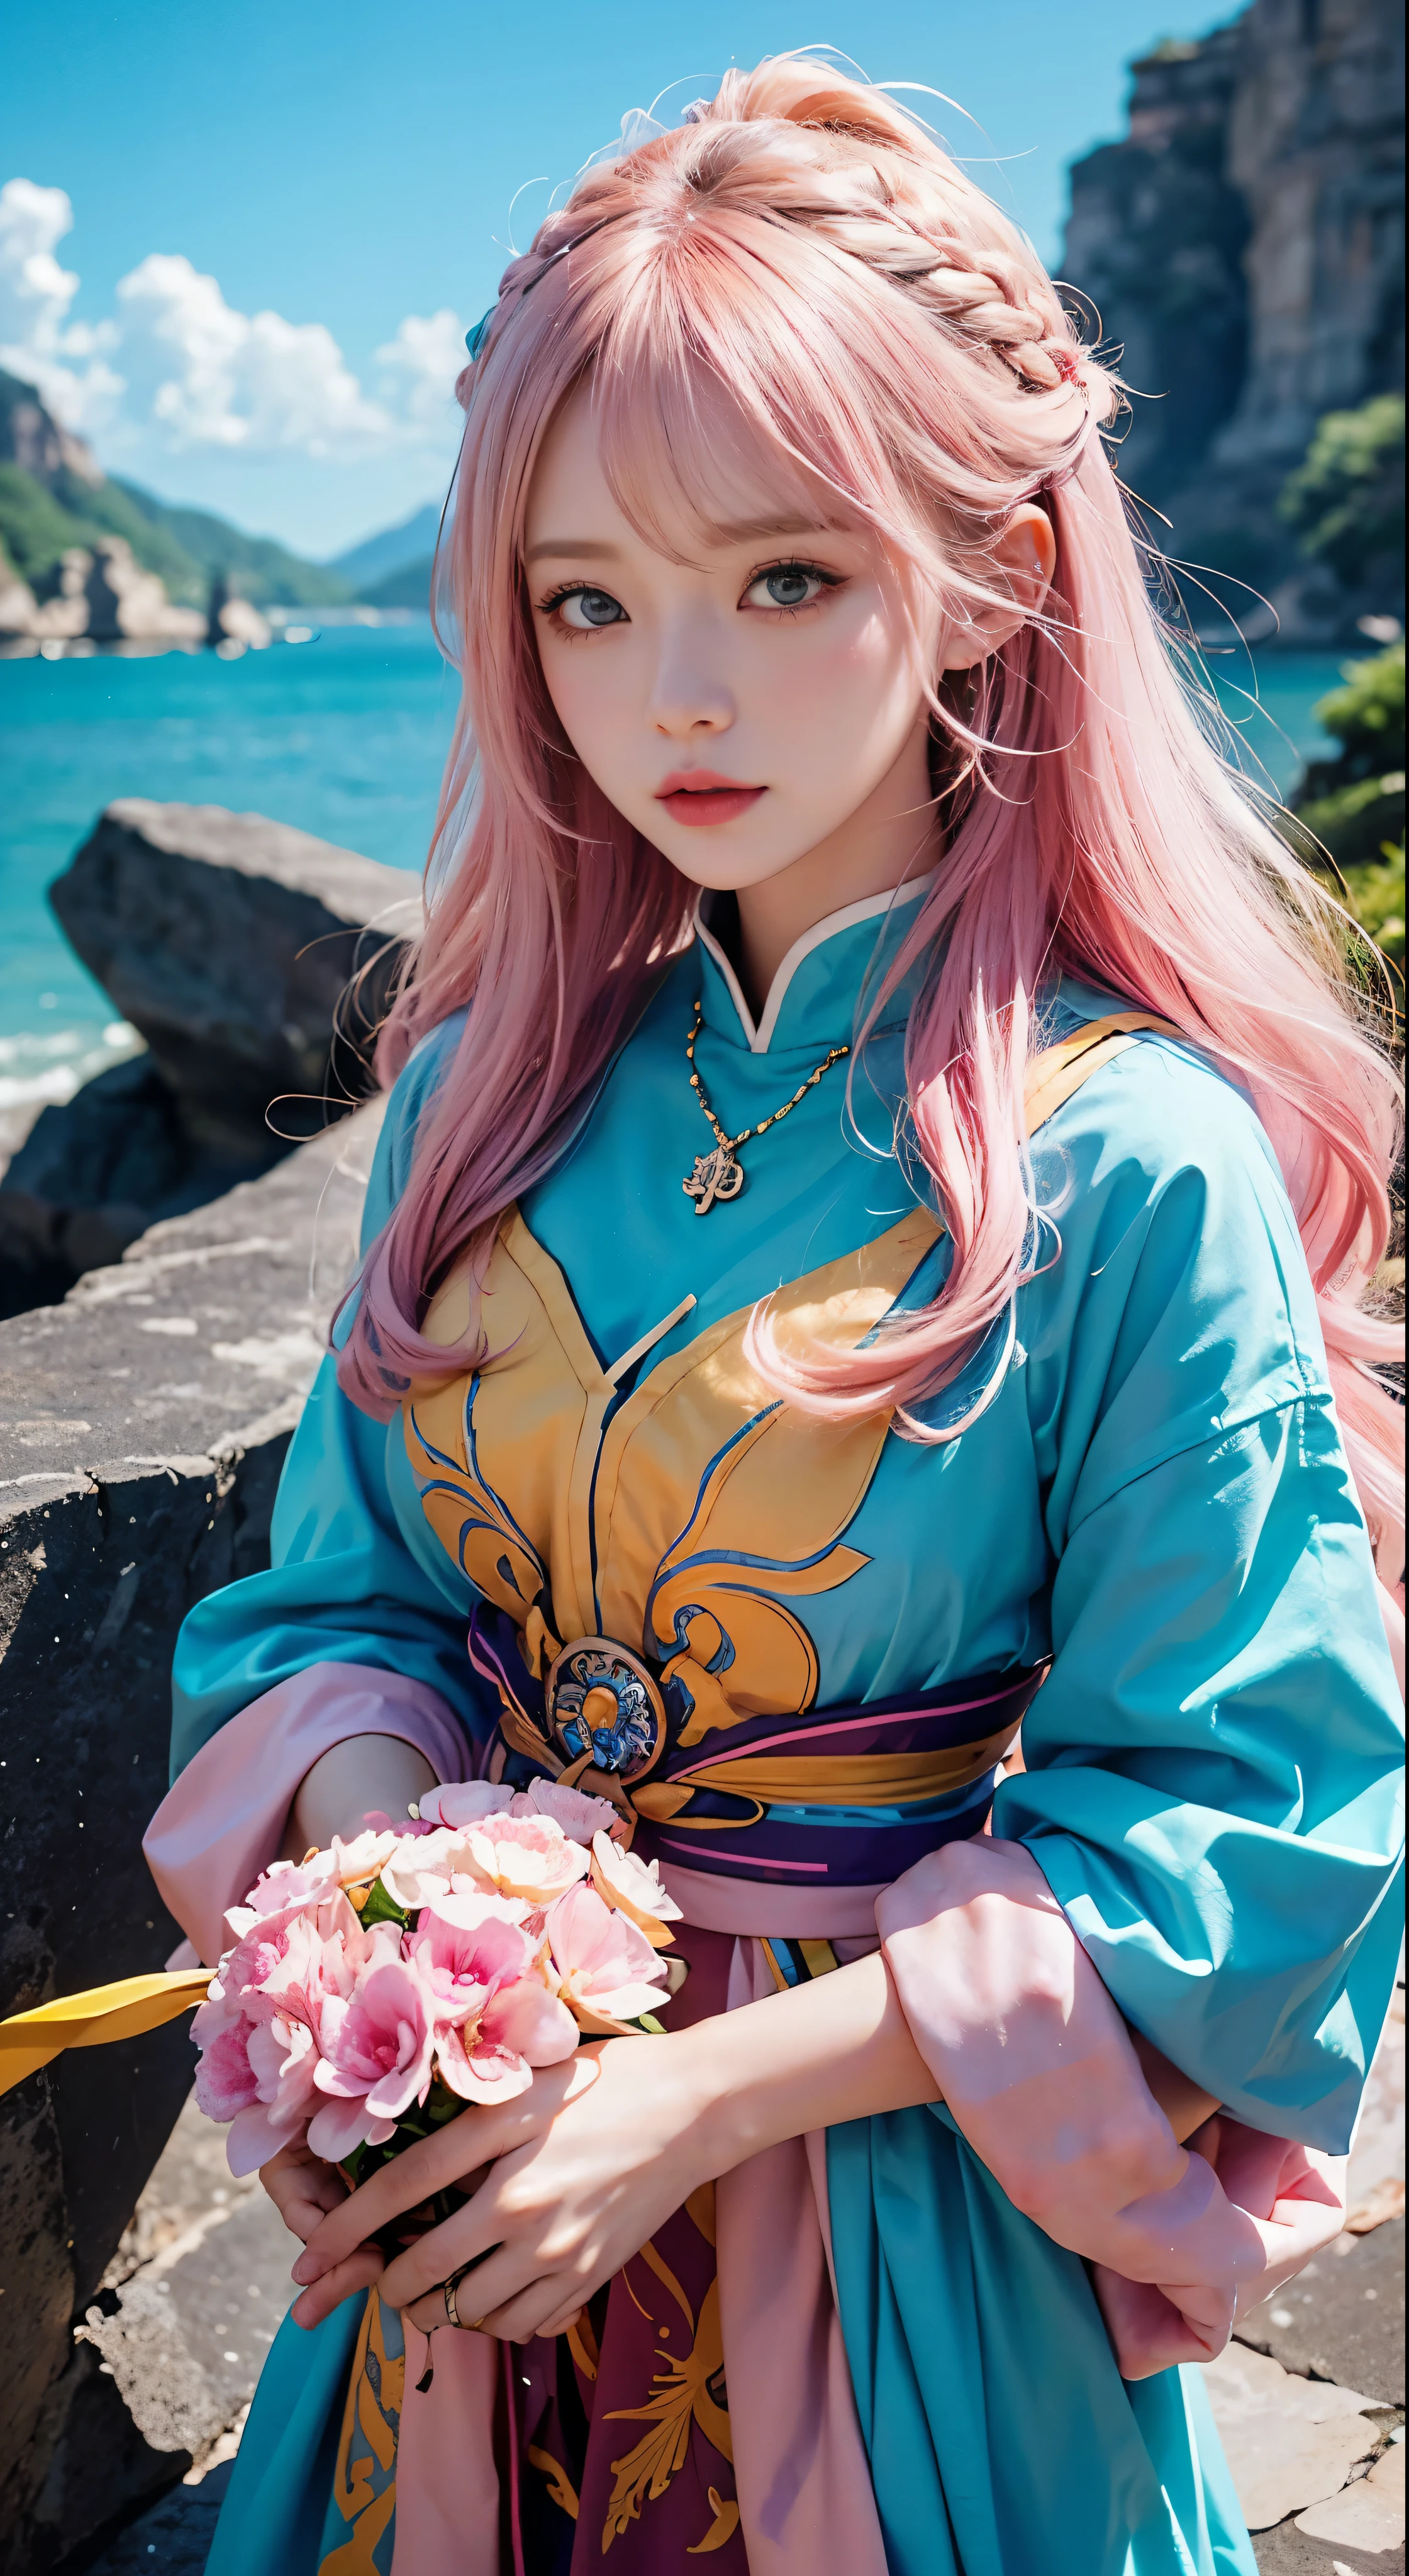 Close-up of a woman with colorful hair and necklace、Anime girl with space hair、The soft vitality of Rossdraws、Gouvez style artwork、Fantasy art style、colorful]、Vibrant fantasy style、Vibrant Rossdraws cartoons、Cosmic and colorful、Guweiz、Colorful digital fantasy art、Stunning art style、Beautiful anime style、White skin、Subtleties